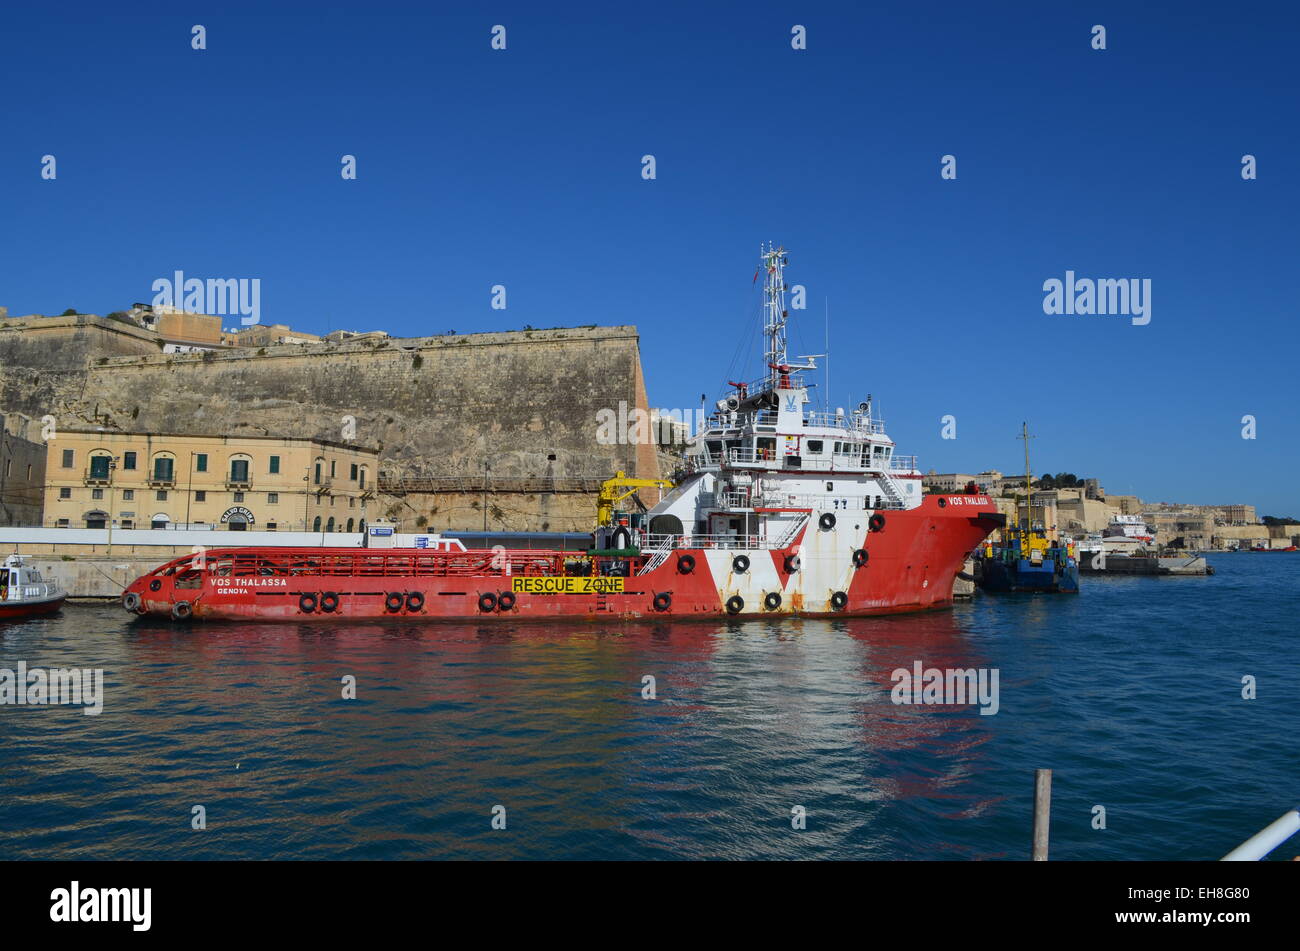 Cruising round the inner walls of the Grand Harbour we pass by another boat moored there under the packed city of Valletta. Stock Photo